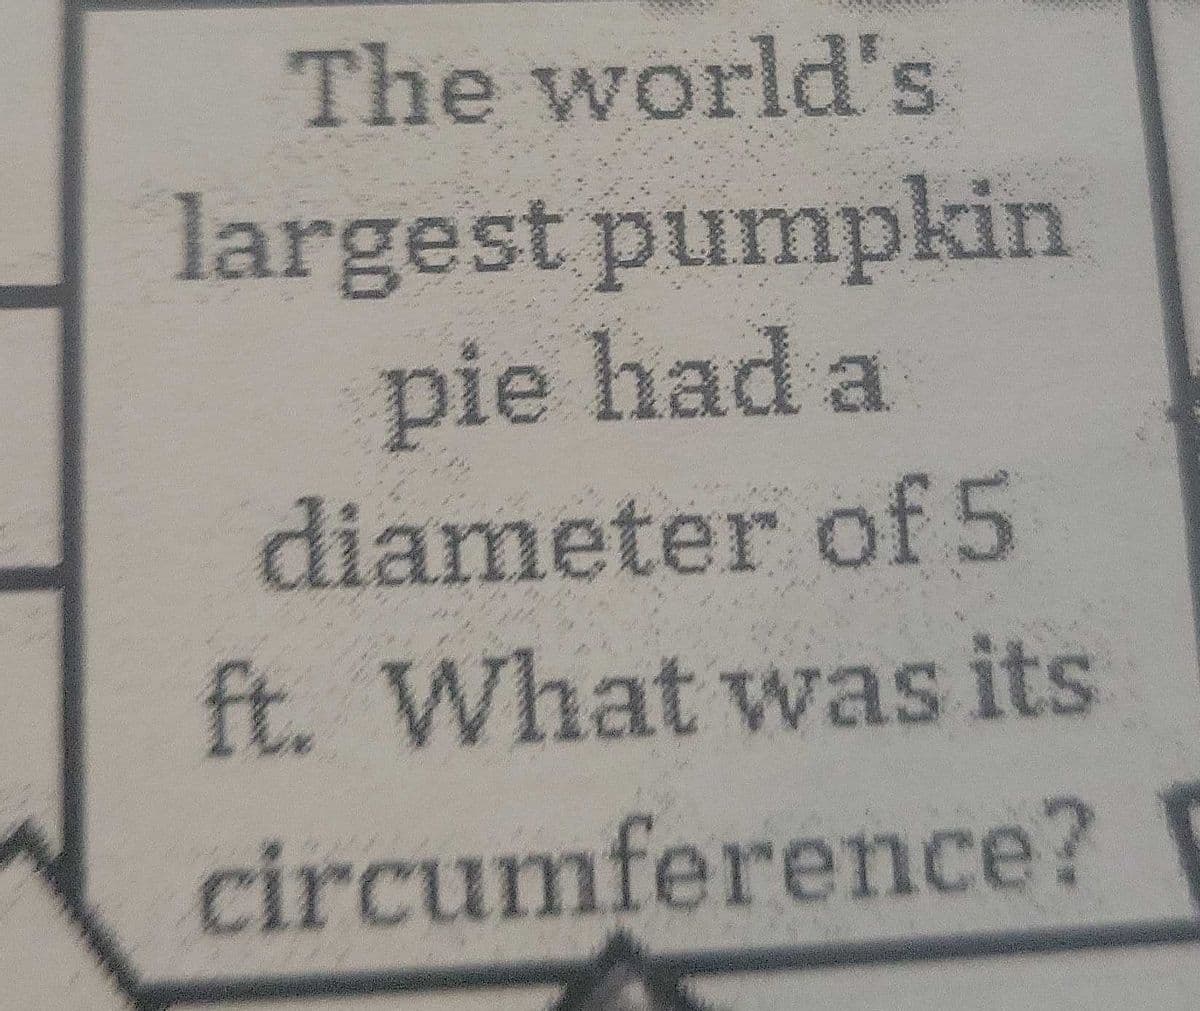 The world's
largest pumpkin
pie had a
diameter of5
ft. What was its
circumference?
